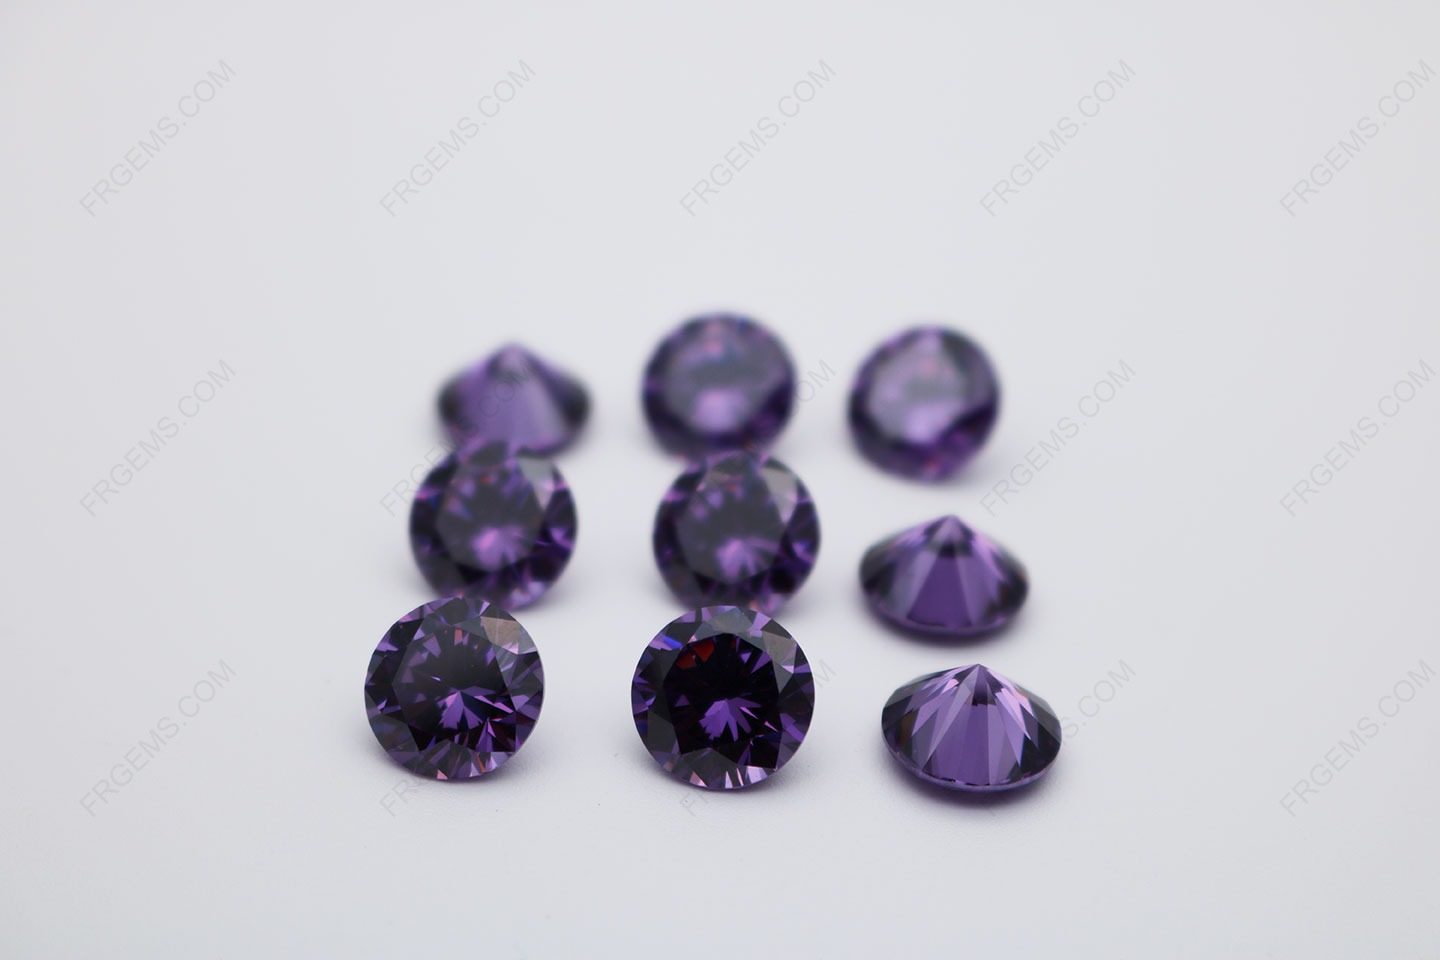 Cubic Zirconia Amethyst Color Round Shape faceted cut 10mm stones CZ10 IMG_0235